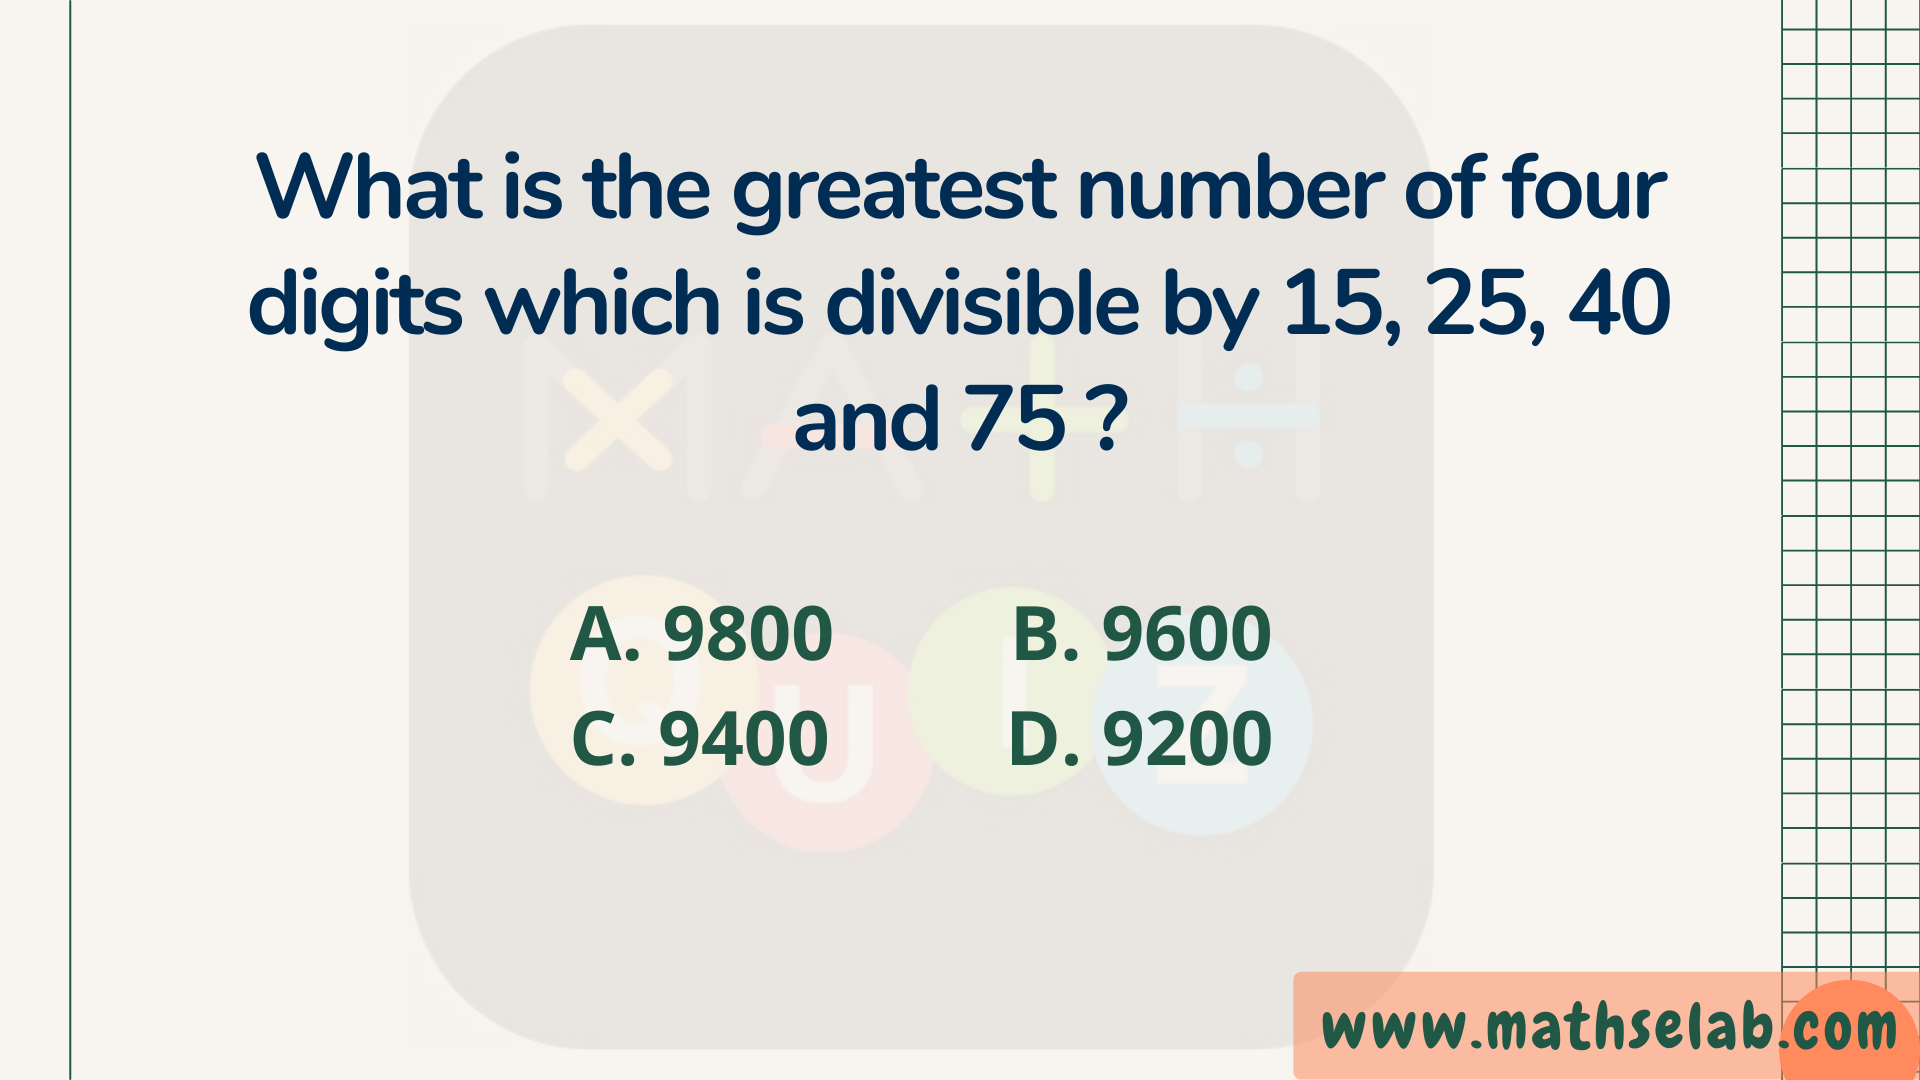 What is the greatest number of four digits which is divisible by 15, 25, 40 and 75 - www.mathselab.com